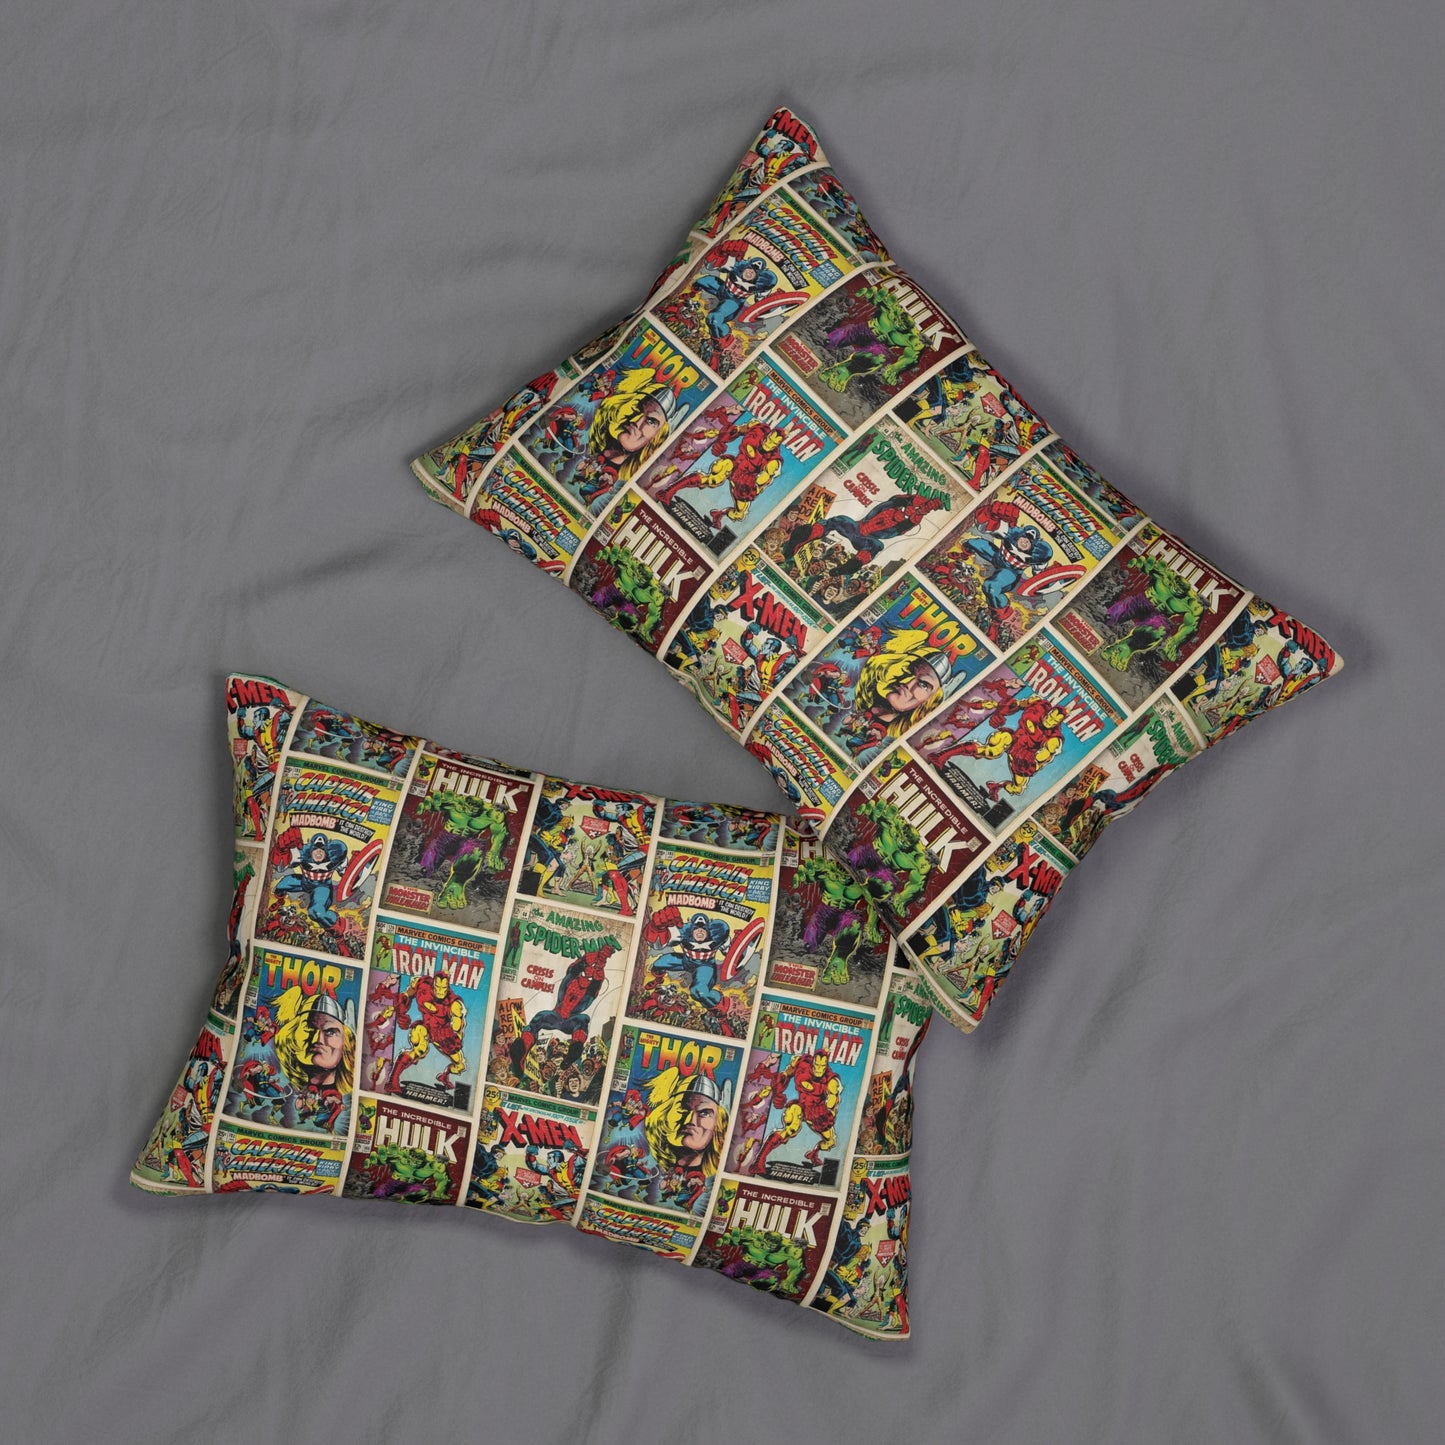 Marvel Comic Book Cover Collage Polyester Lumbar Pillow